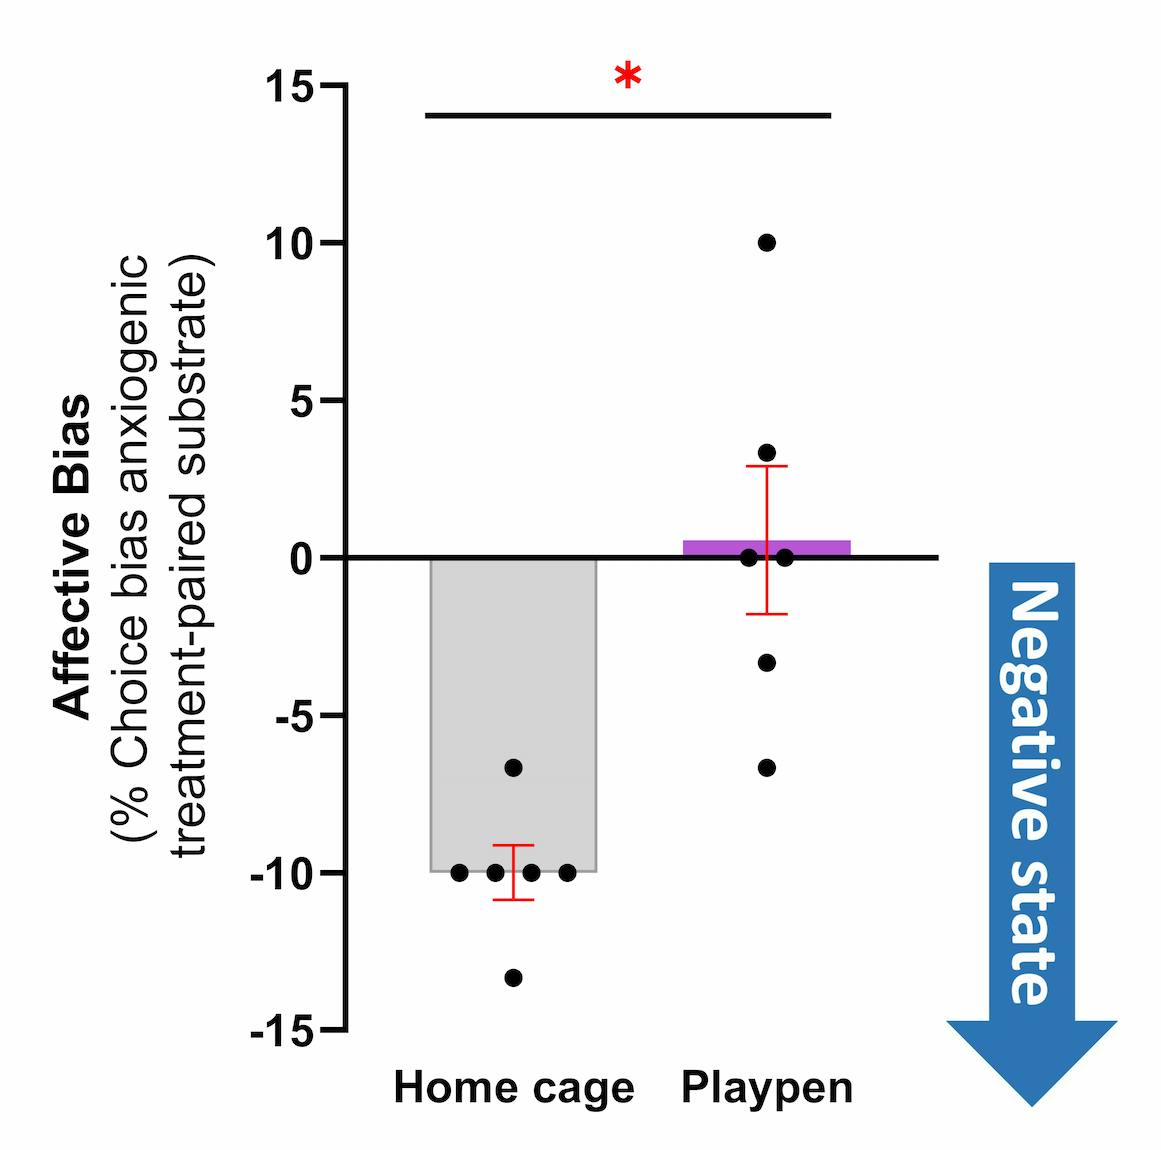 A graph demonstrating a reduction in affective bias when rats are placed in a playpen after a negative experience.